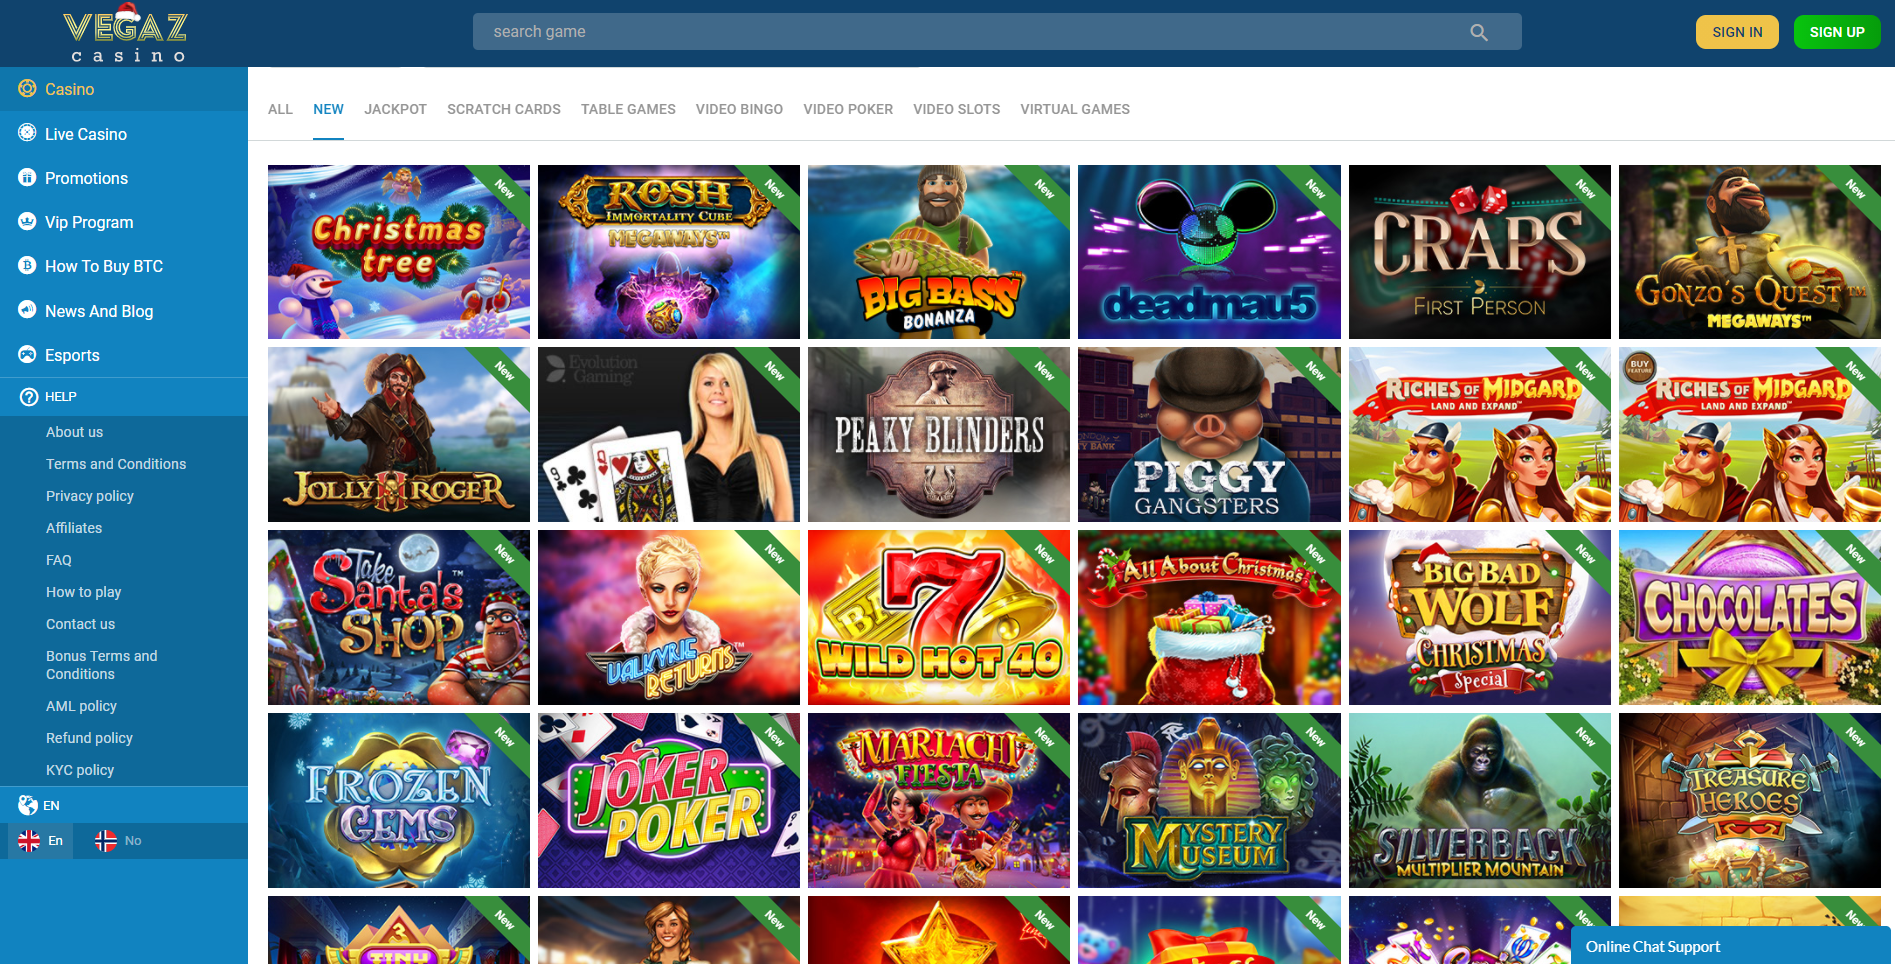 vegaz casino online in Lithuania registration for new customers and games 